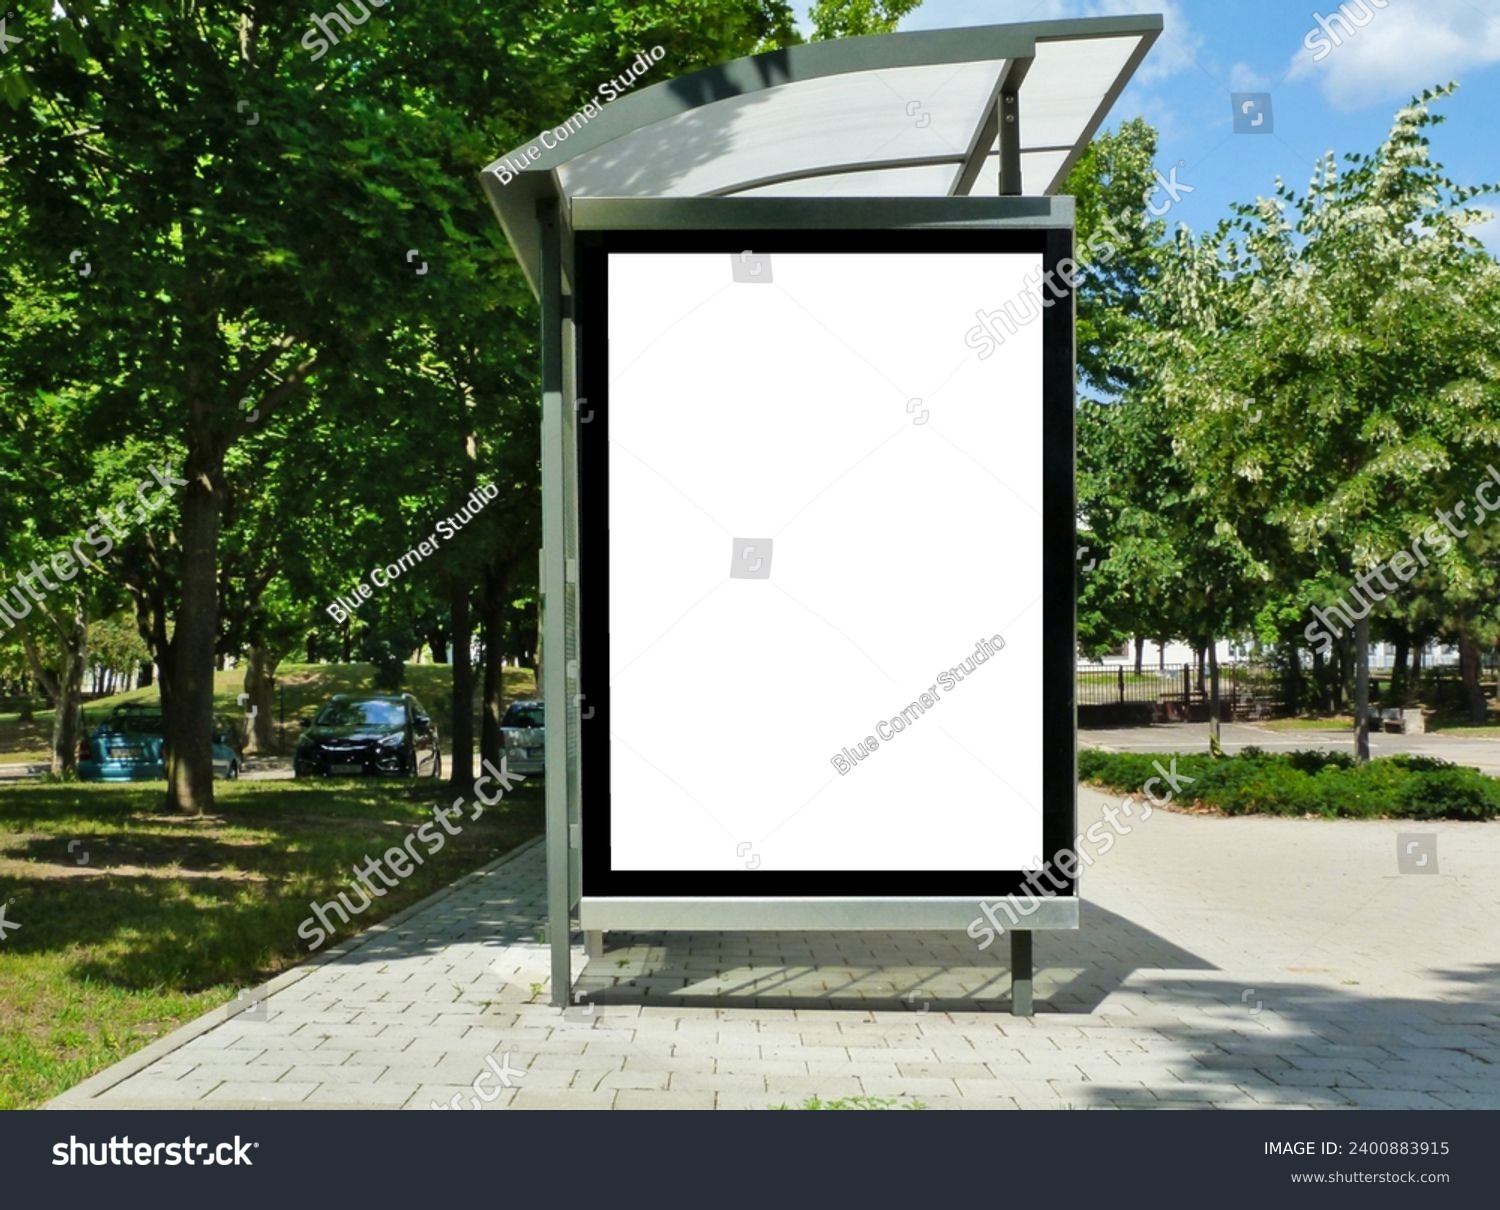 bus stop with blank white poster ad lightbox. bus shelter advertising concept. glass and aluminum. commercial poster space and display panel. green urban street. lush foliage. soft background #2400883915